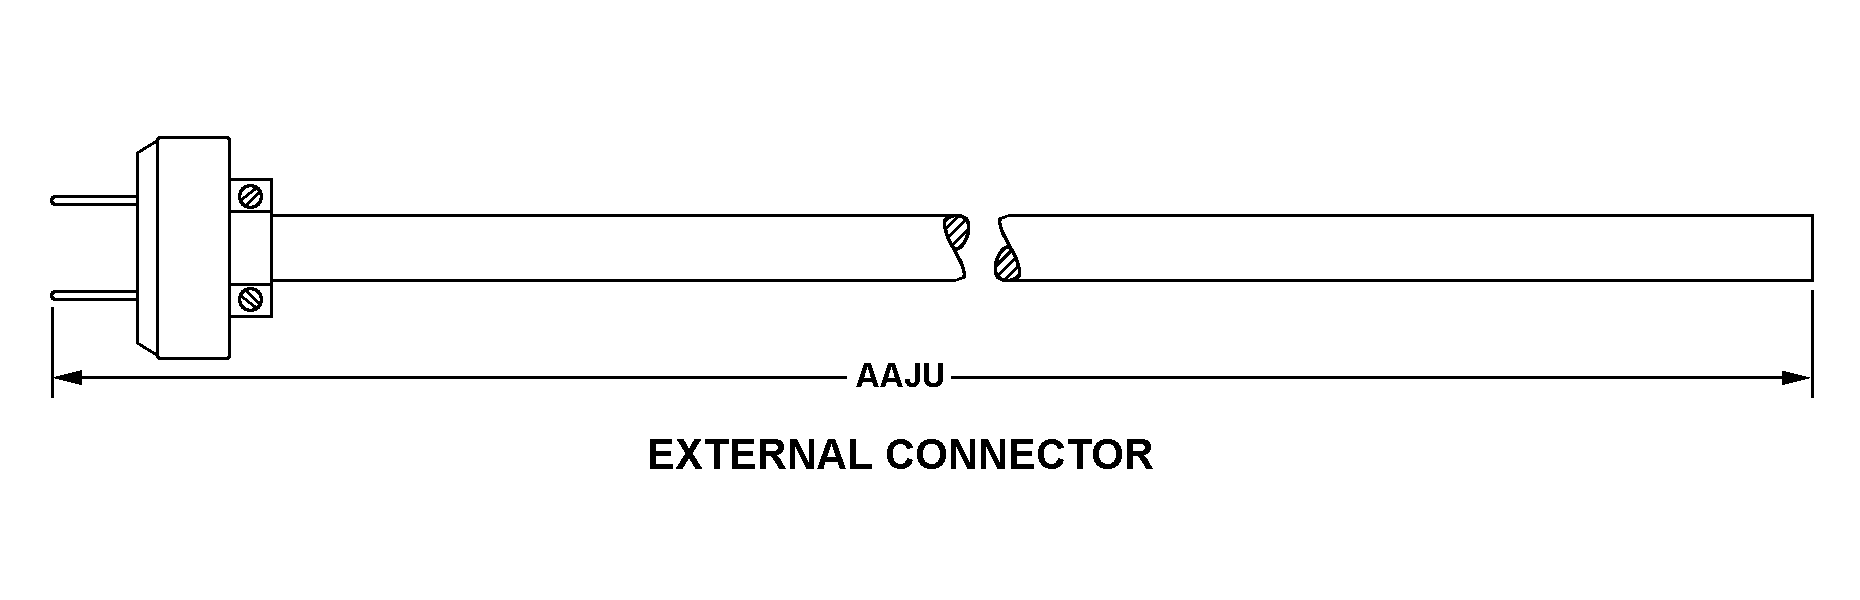 EXTERNAL CONNECTOR style nsn 6150-01-035-7678